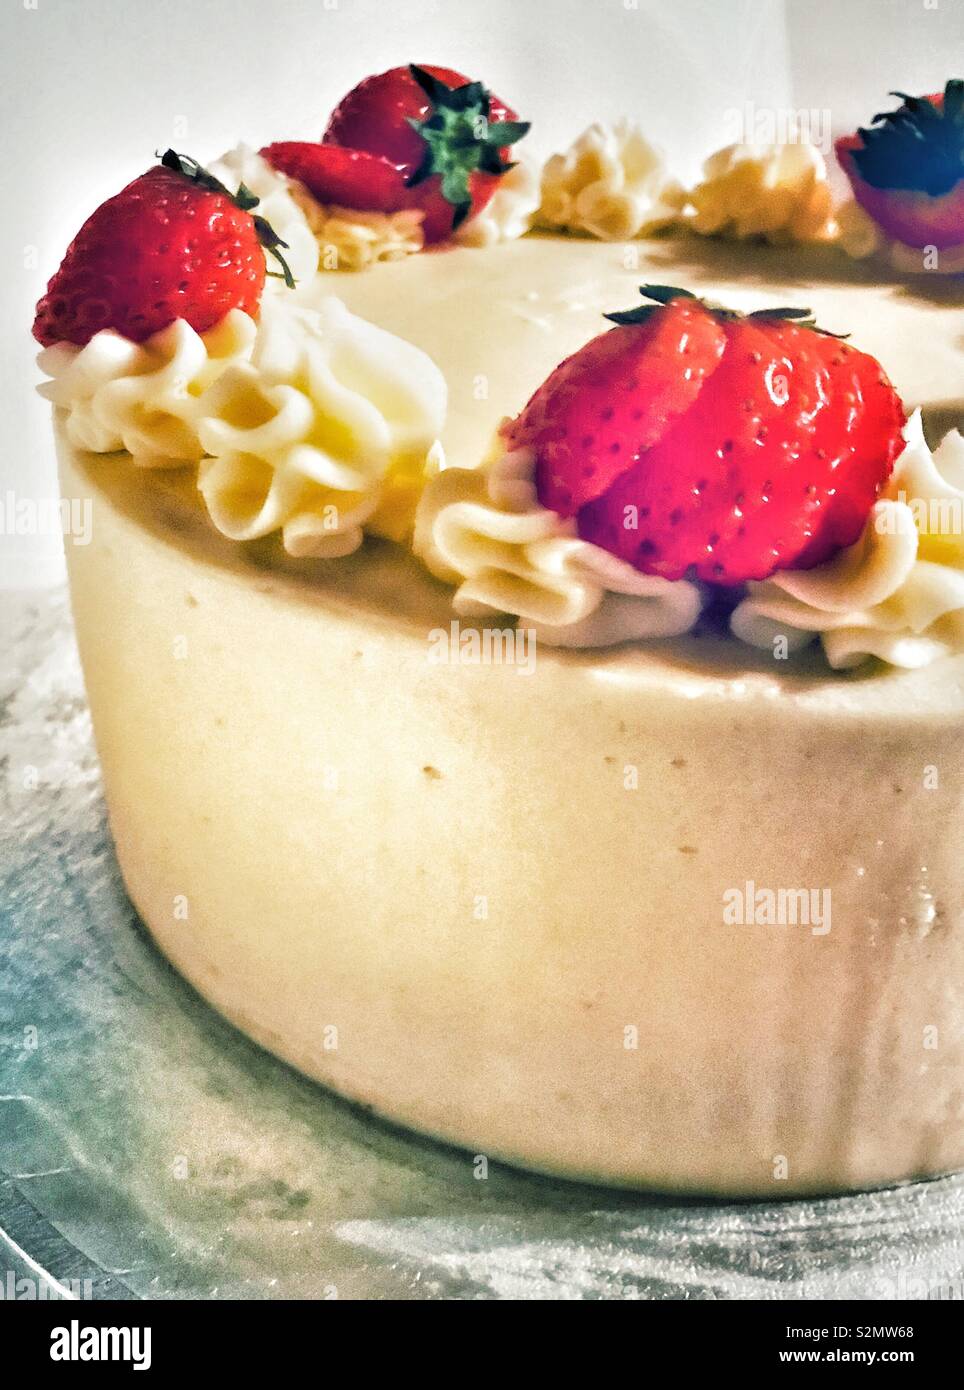 Cake with butter icing and strawberries Stock Photo